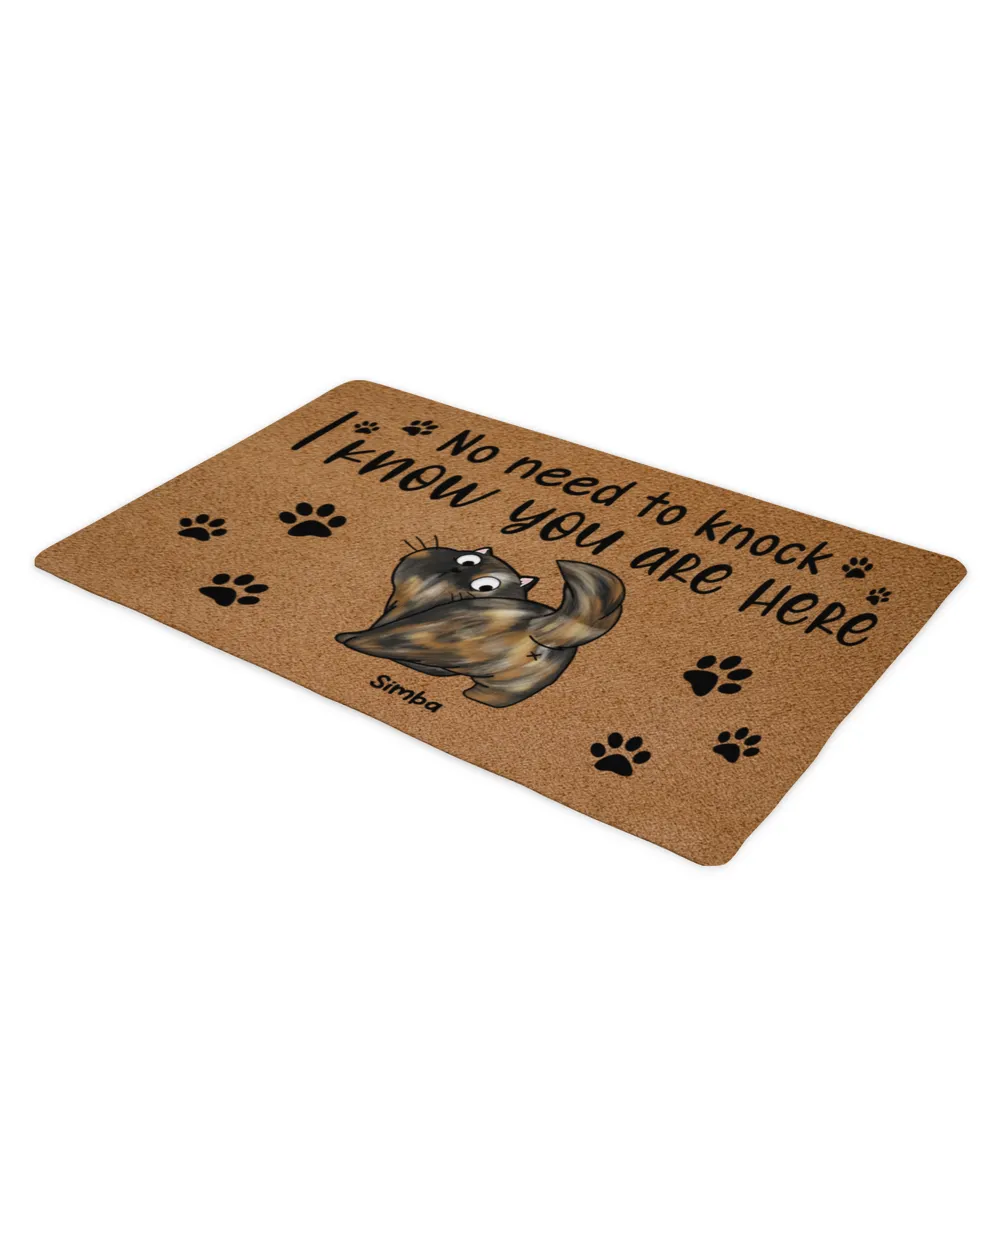 Personalized No Need To Knock I Know You Are Here Cat Doormat HOC200323DRM1